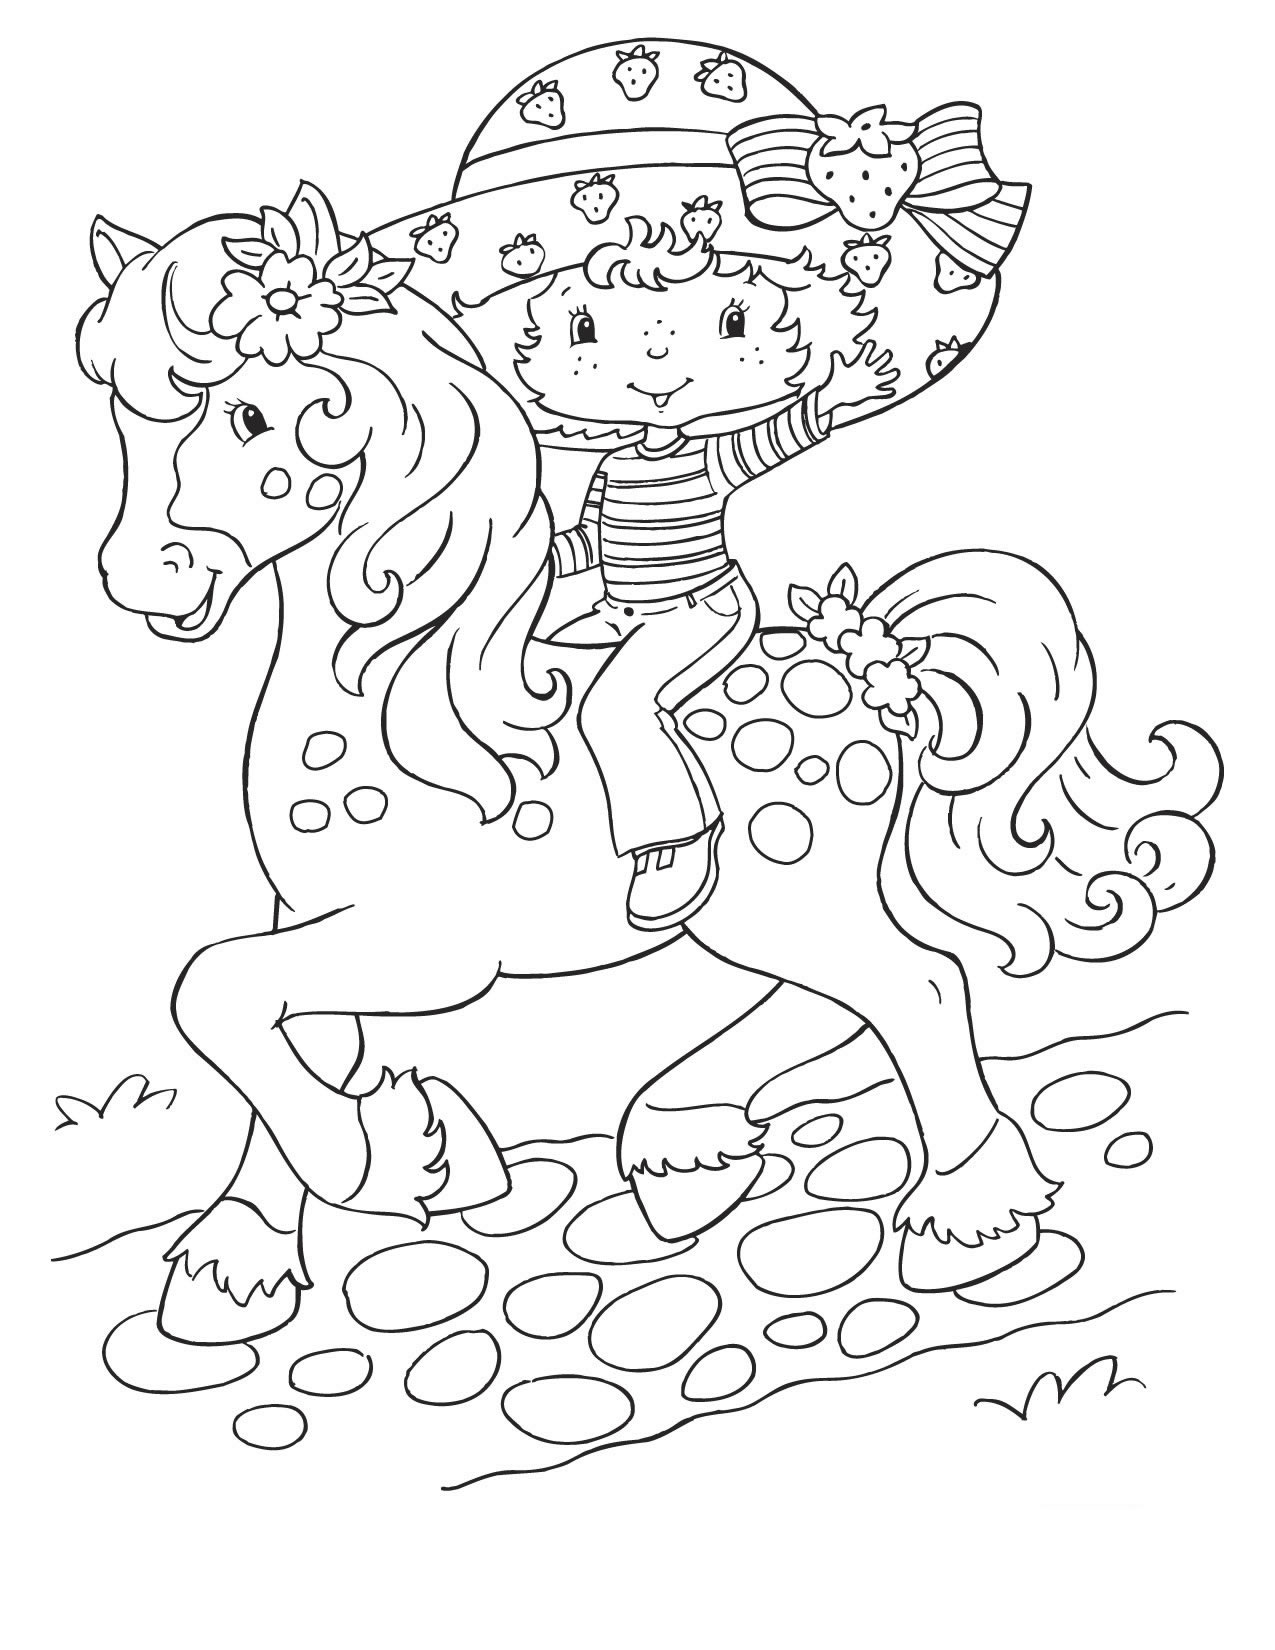 Strawberry Shortcake coloring pages for kids to print - Strawberry Shortcake  Kids Coloring Pages